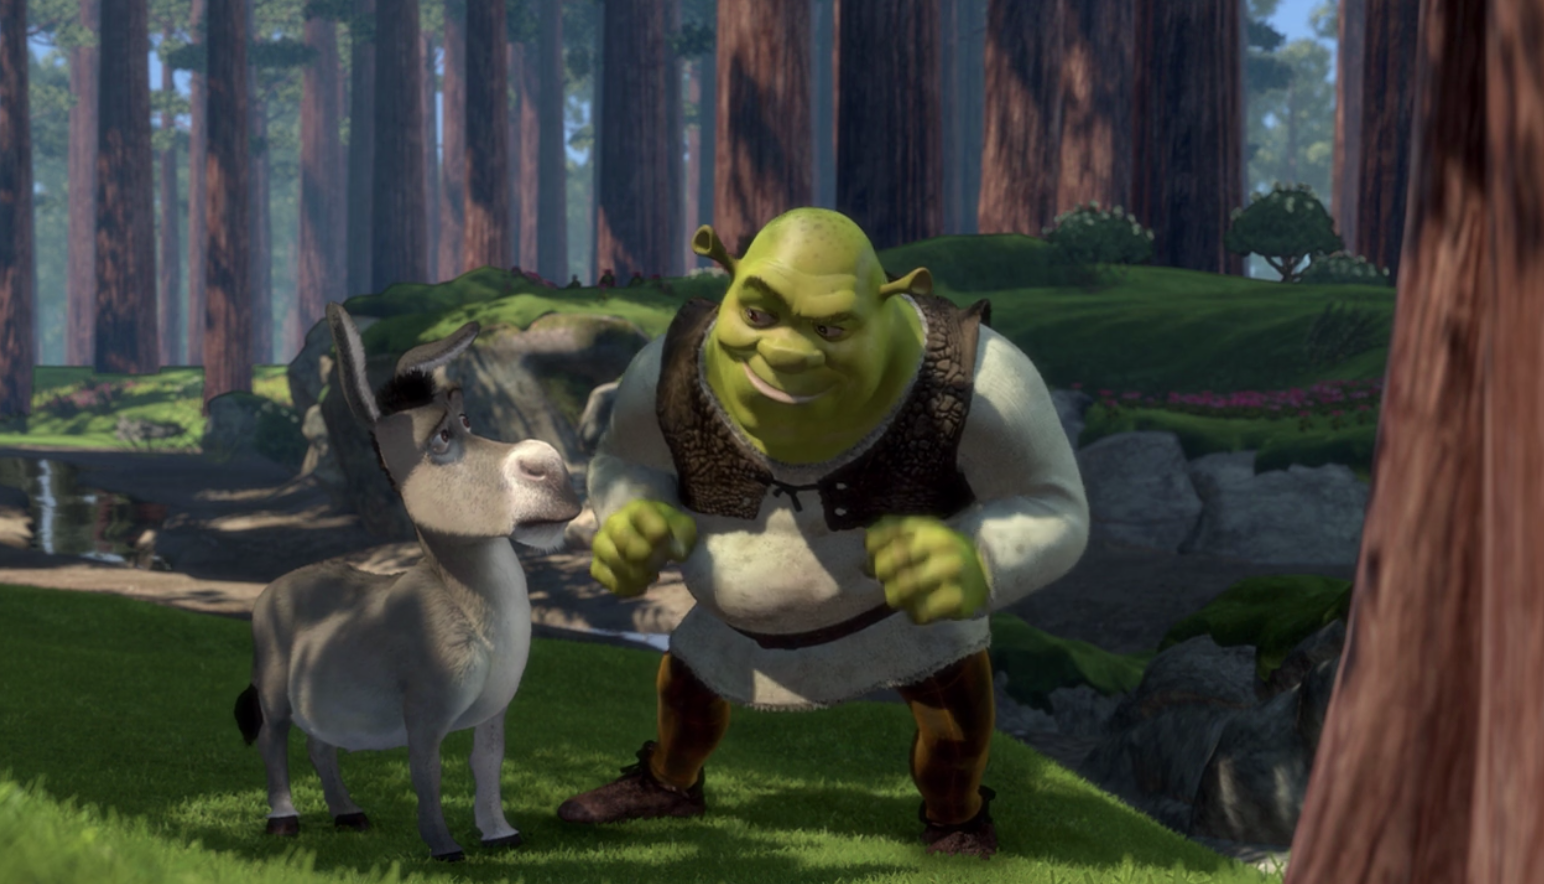 Shrek and Donkey walking together in the forest 